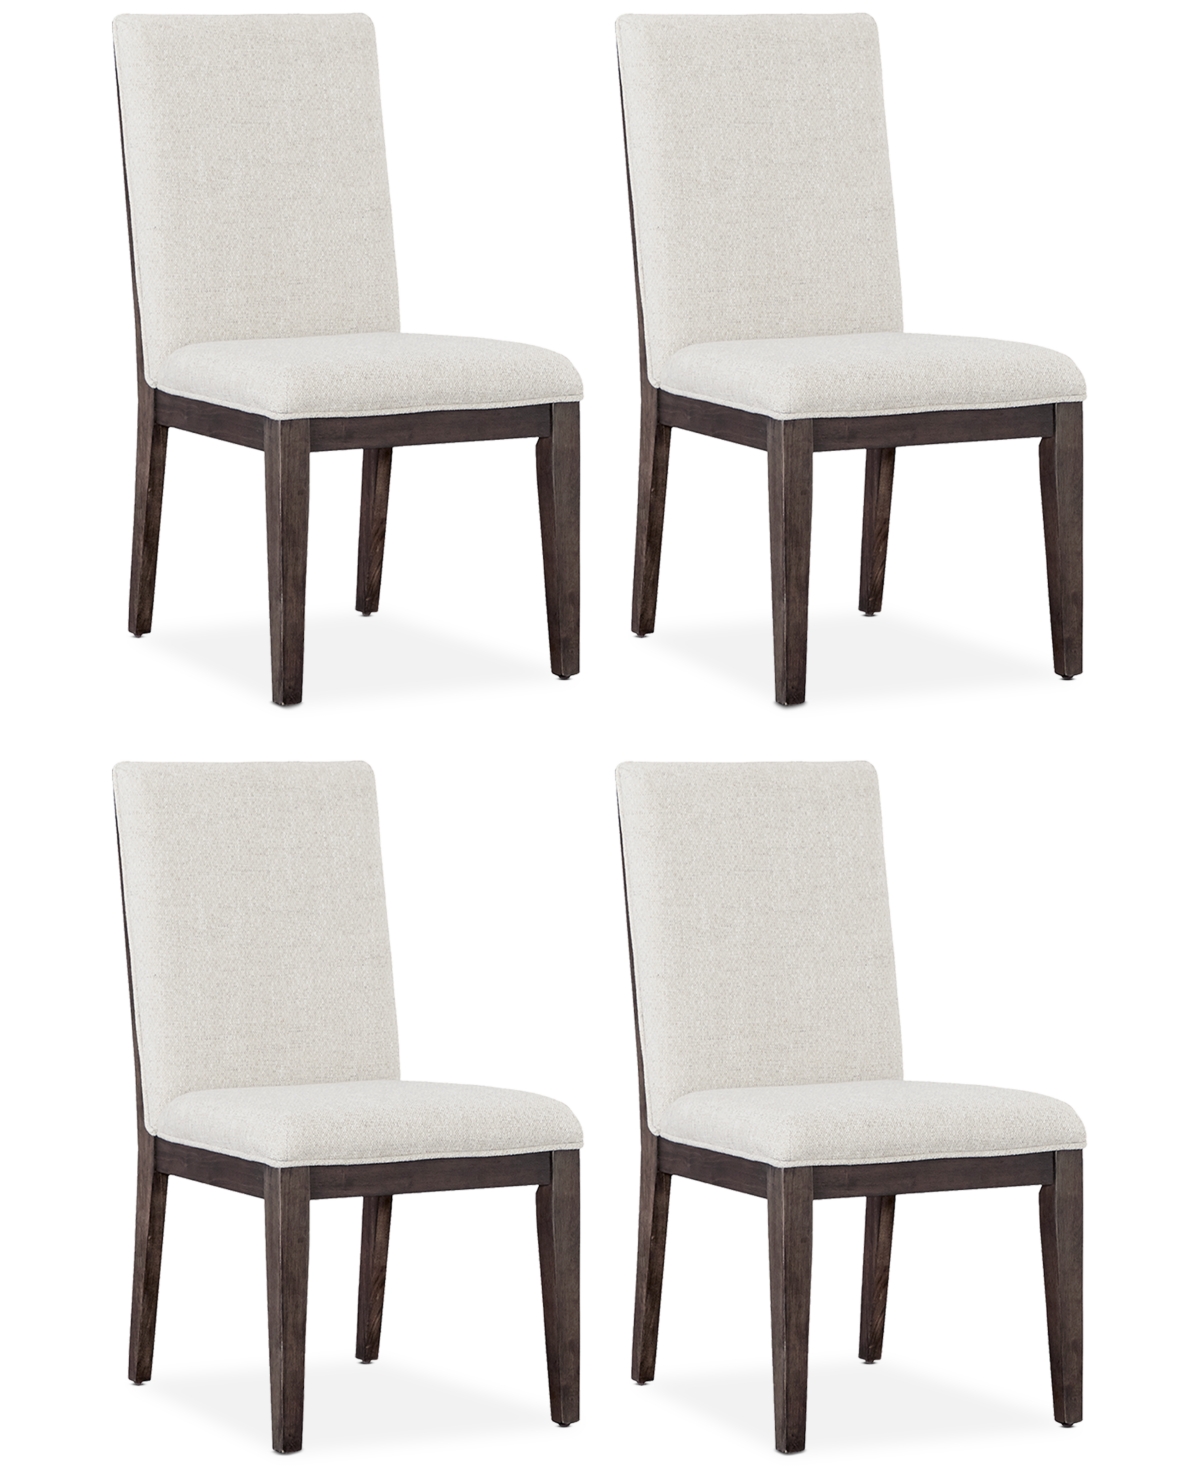 Aspenhome Beckett Upholstered Dining Side Chair 4pc Set